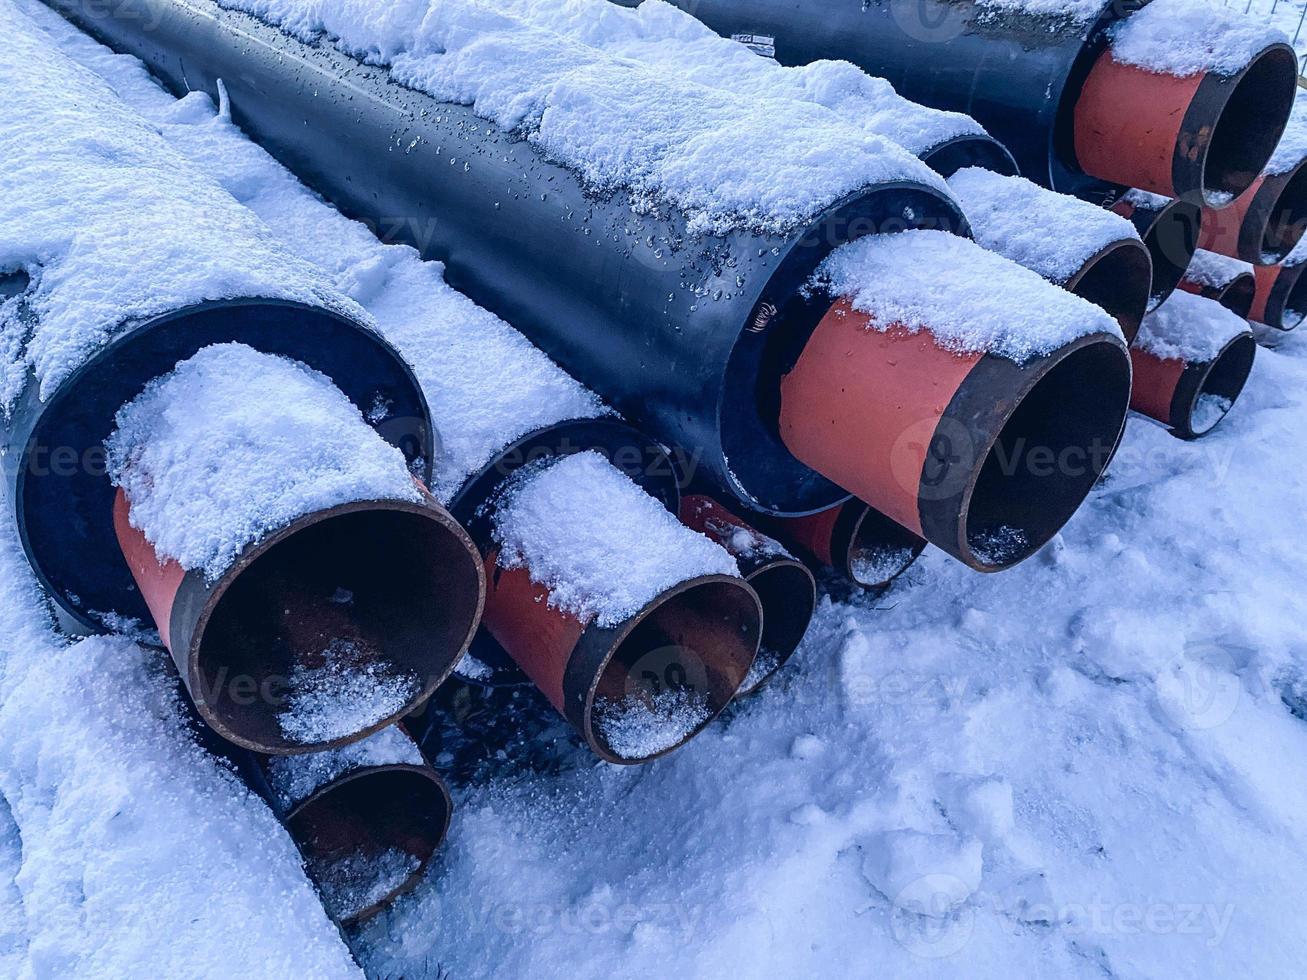 material for repair work. sewer pipes for laying communications. long, black pipes made of polypropylene on white pure snow with red tips photo